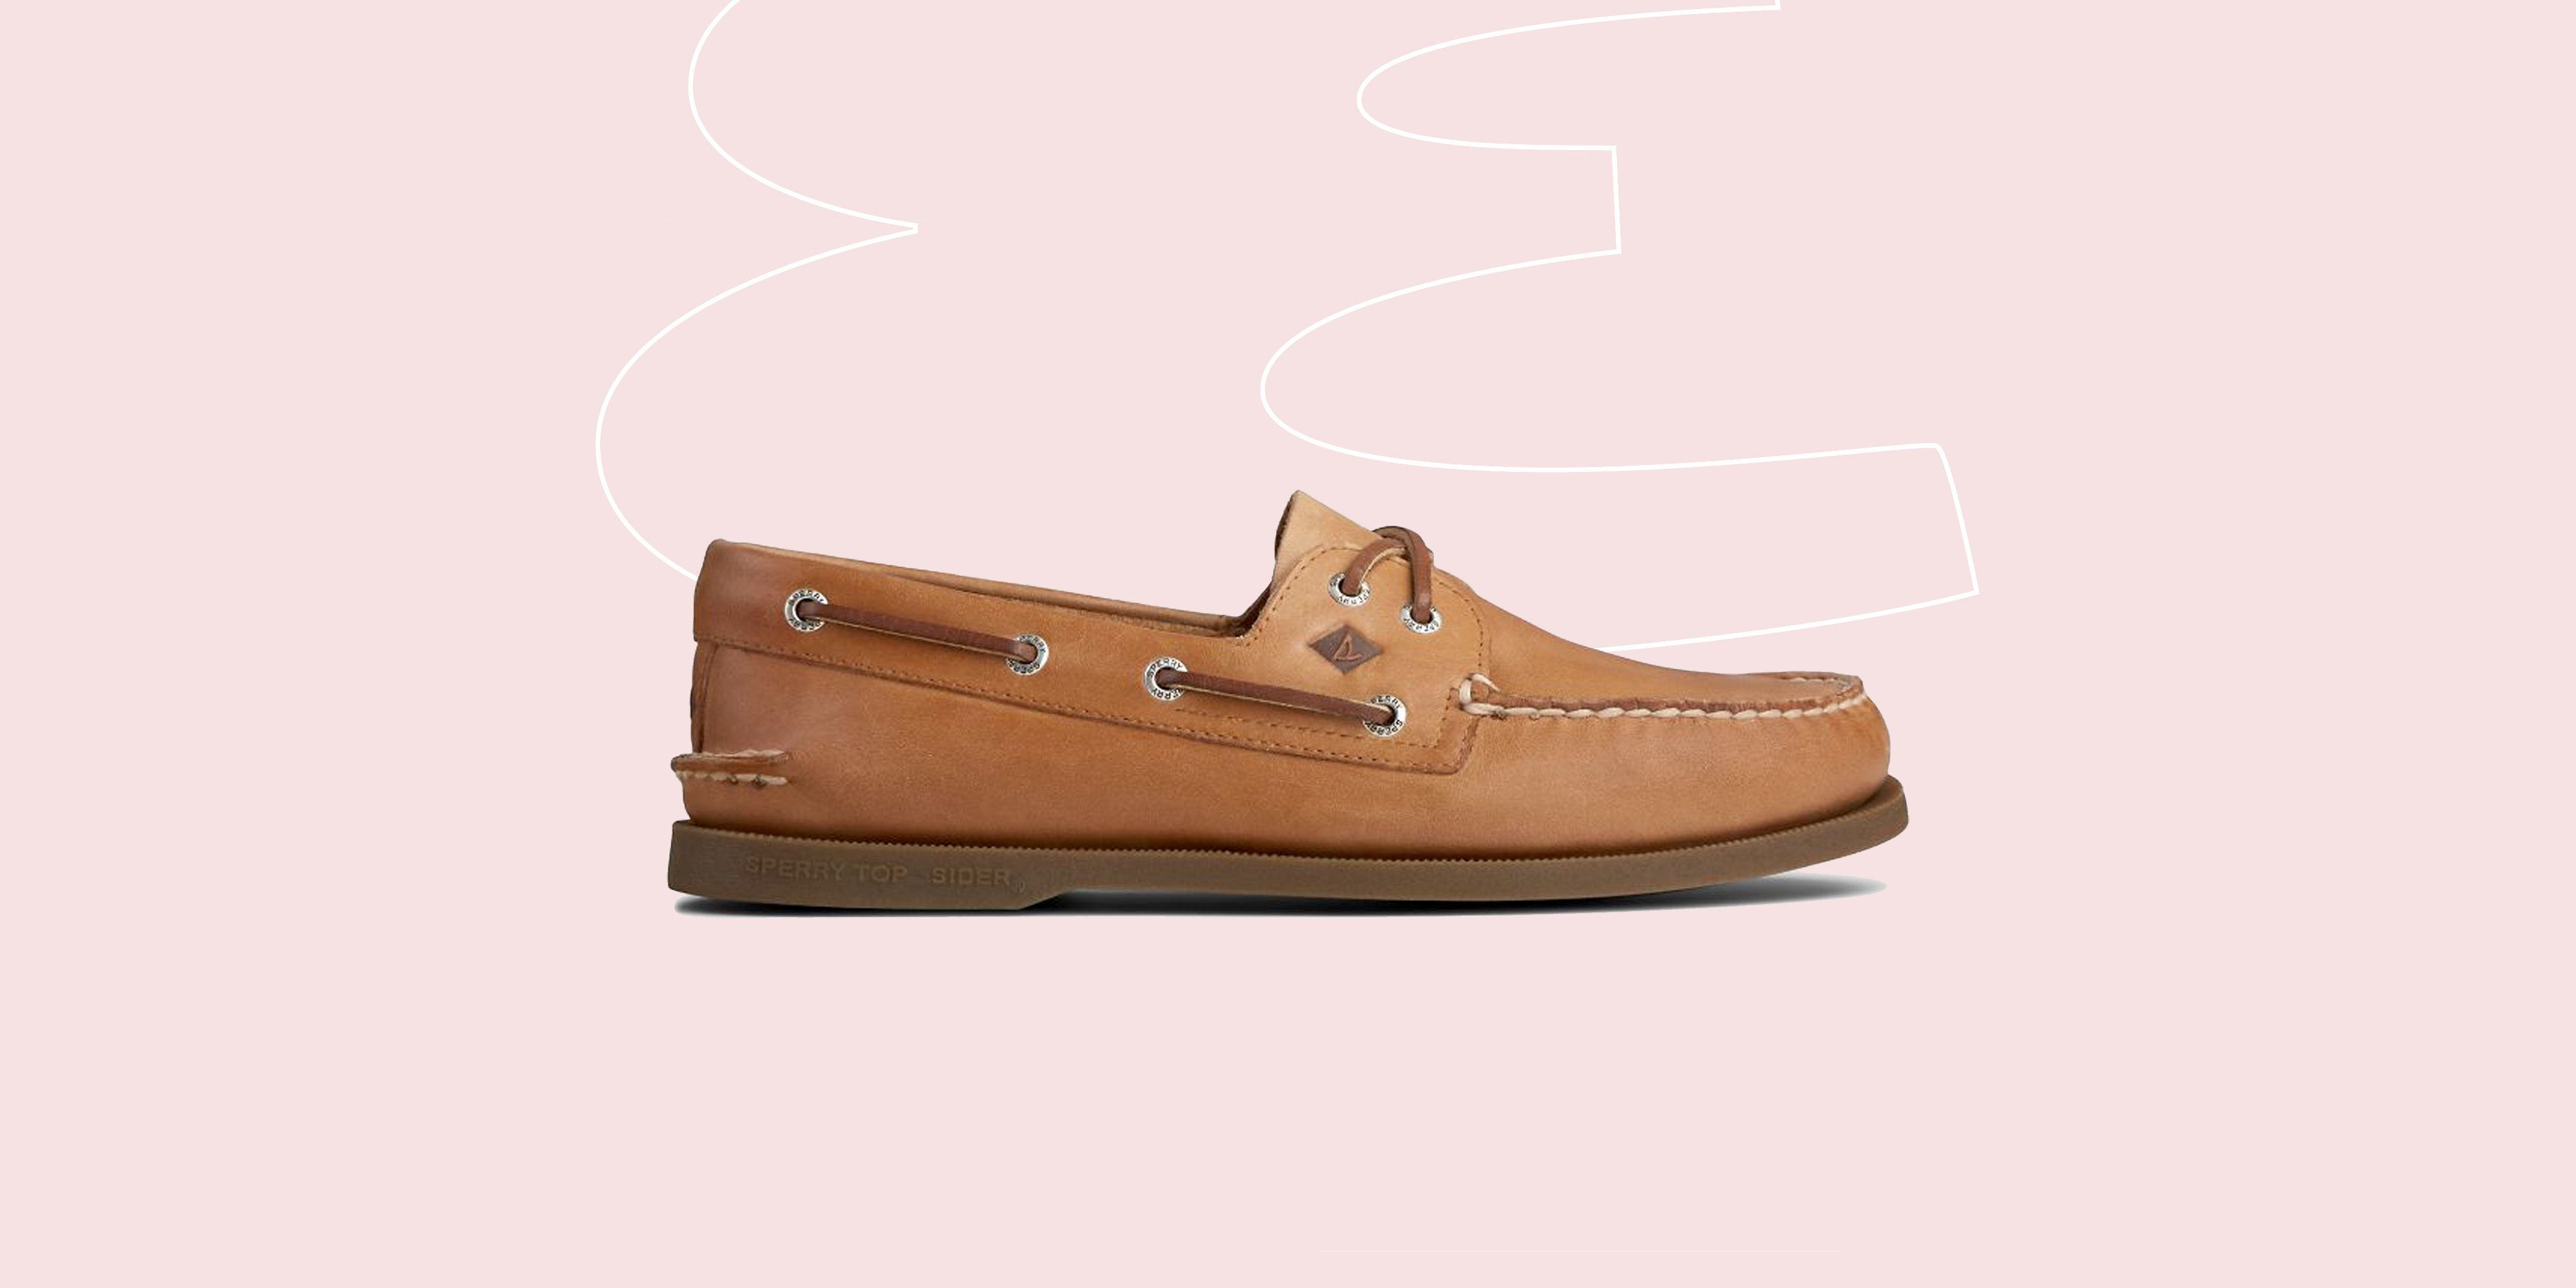 RALPH LAUREN BOAT SHOES ON SALE MADE IN USA – The cricket wealth Times co.